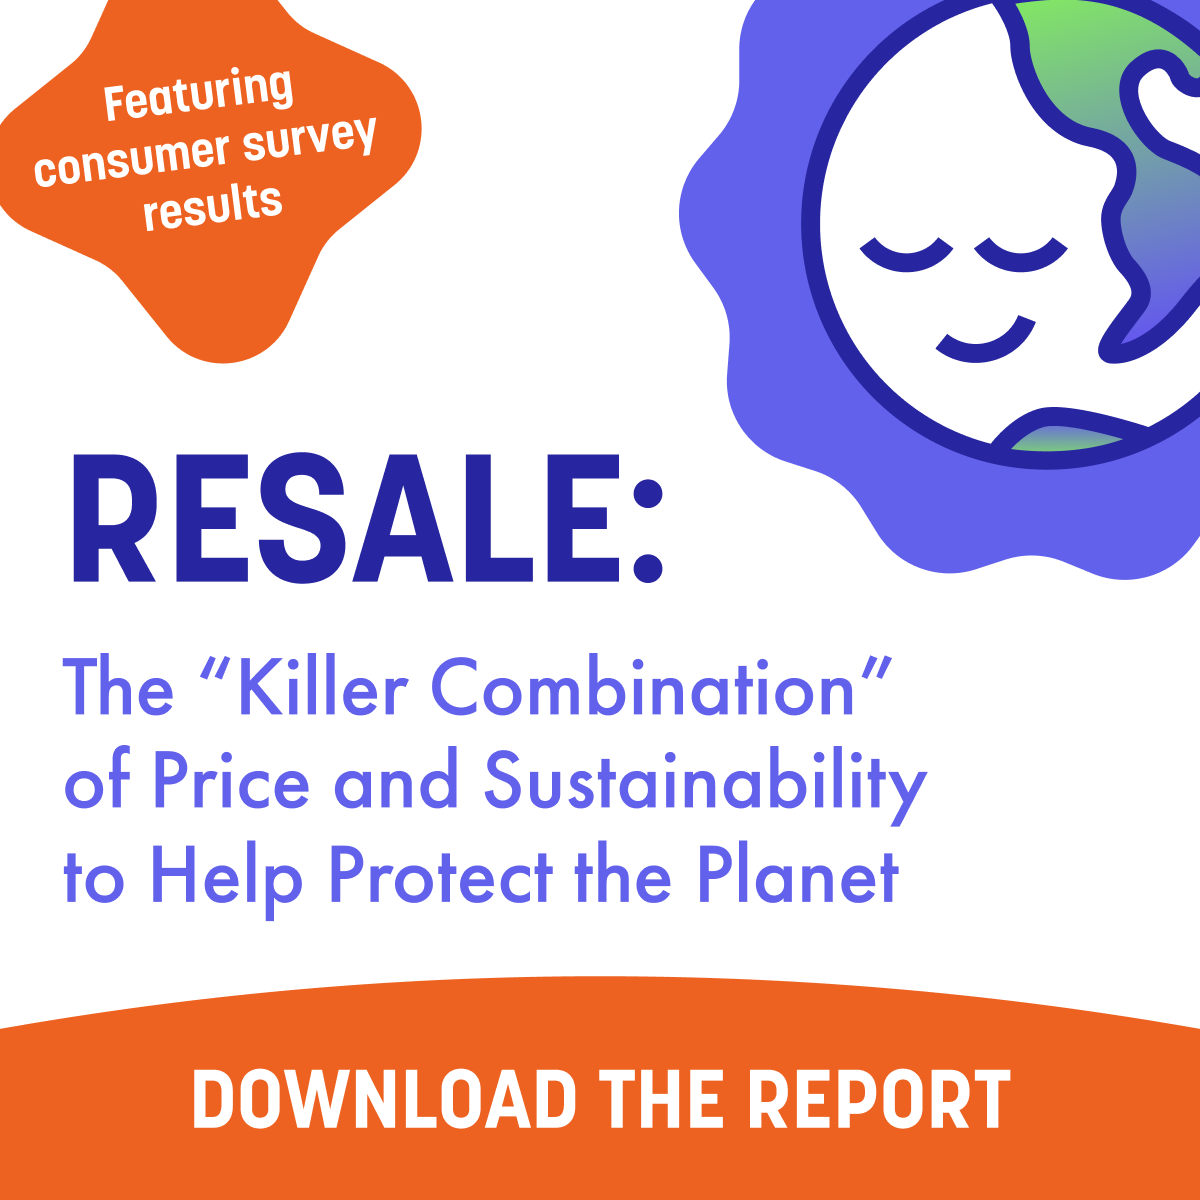 FloorFound | Resale: The “Killer Combination” of Price and Sustainability to Help Protect the Planet